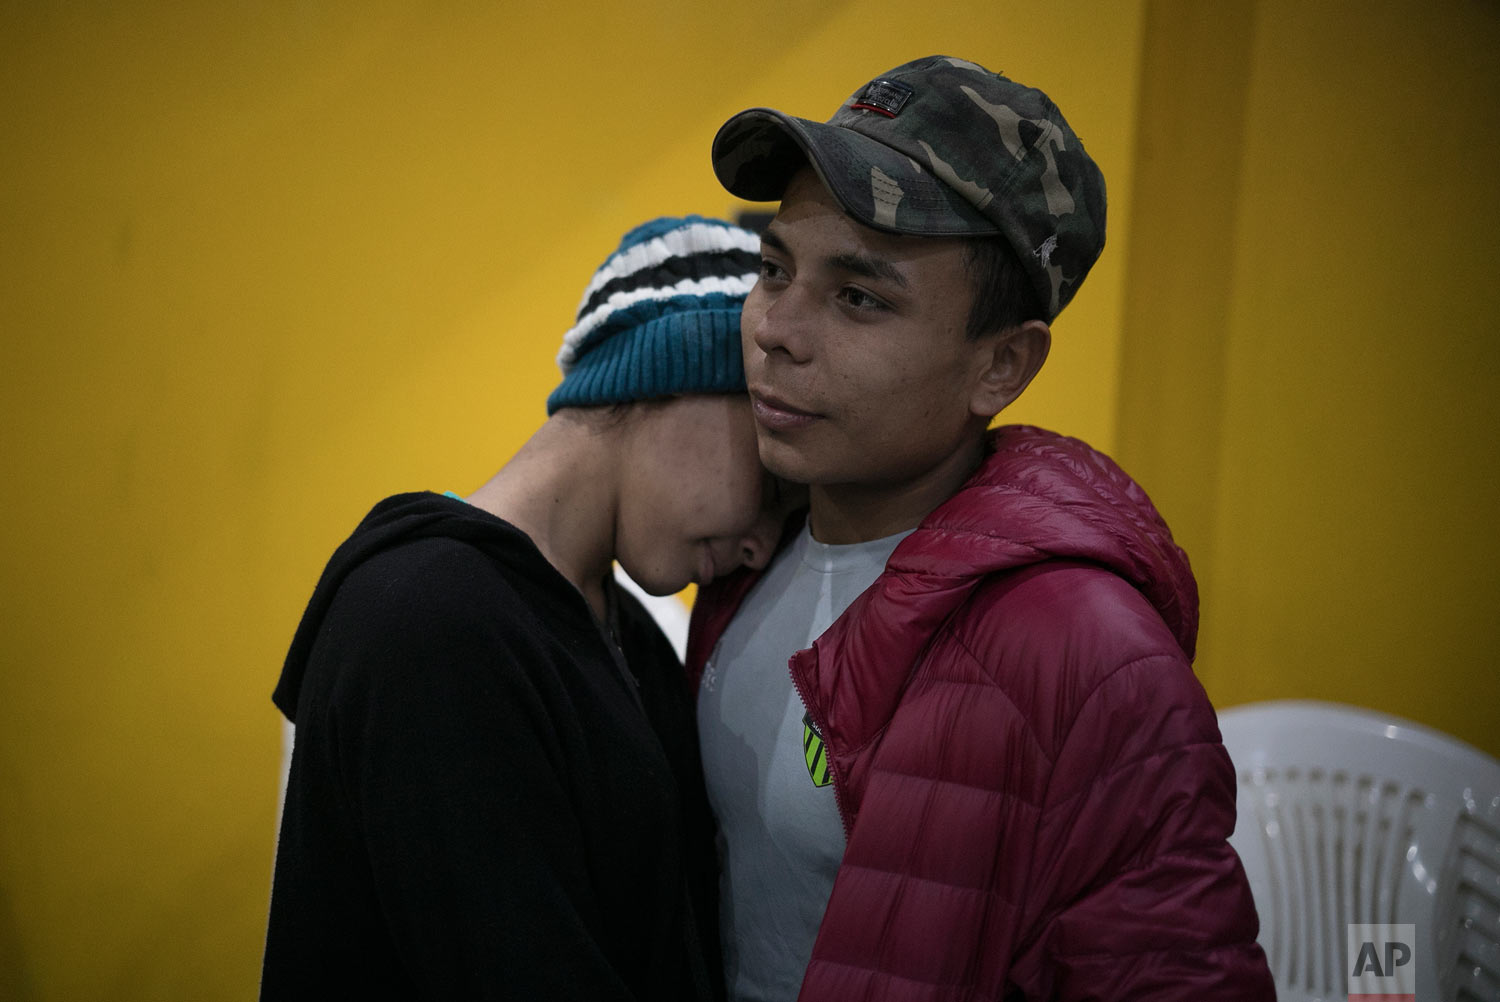  Central American teen migrants, Milagro de Jesus Henriquez Ayala, 15, and Josue Mejia Lucero, 17, embrace at the end of a Christian religious service in the Agape World Mission shelter in Tijuana, Mexico, Feb. 8, 2019. (AP Photo/Emilio Espejel) 